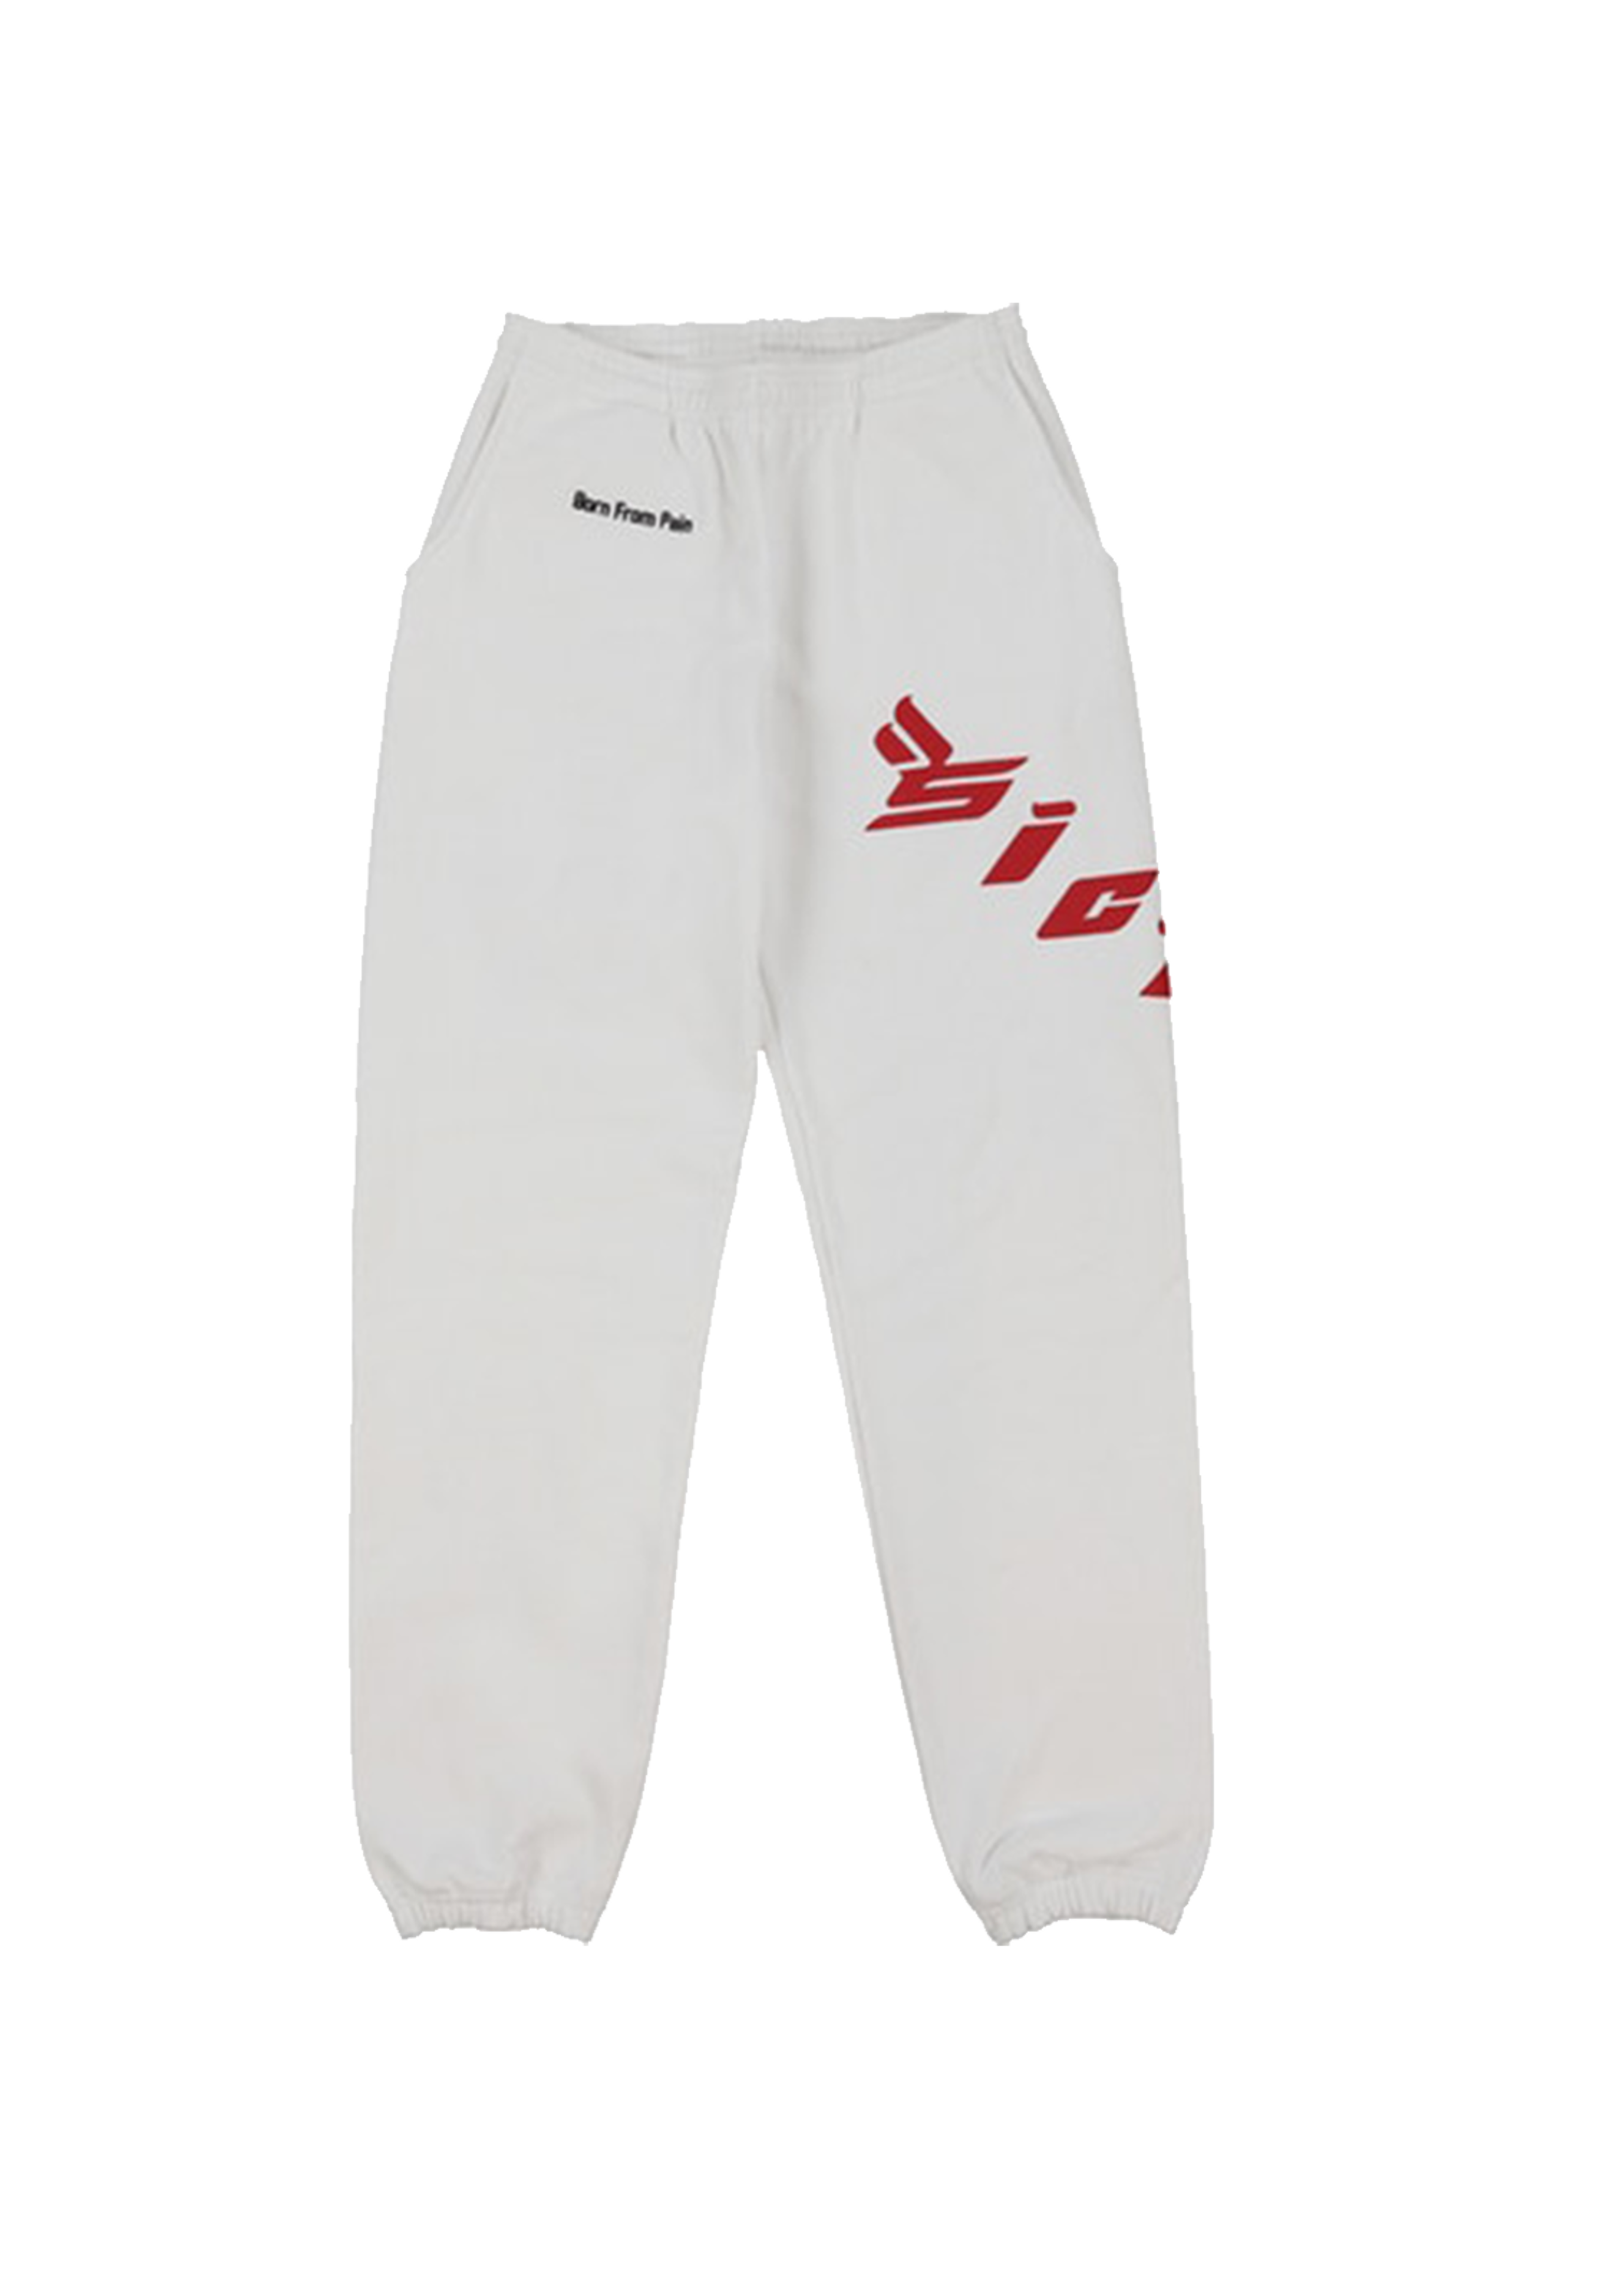 Born From Pain Sweatpants - White